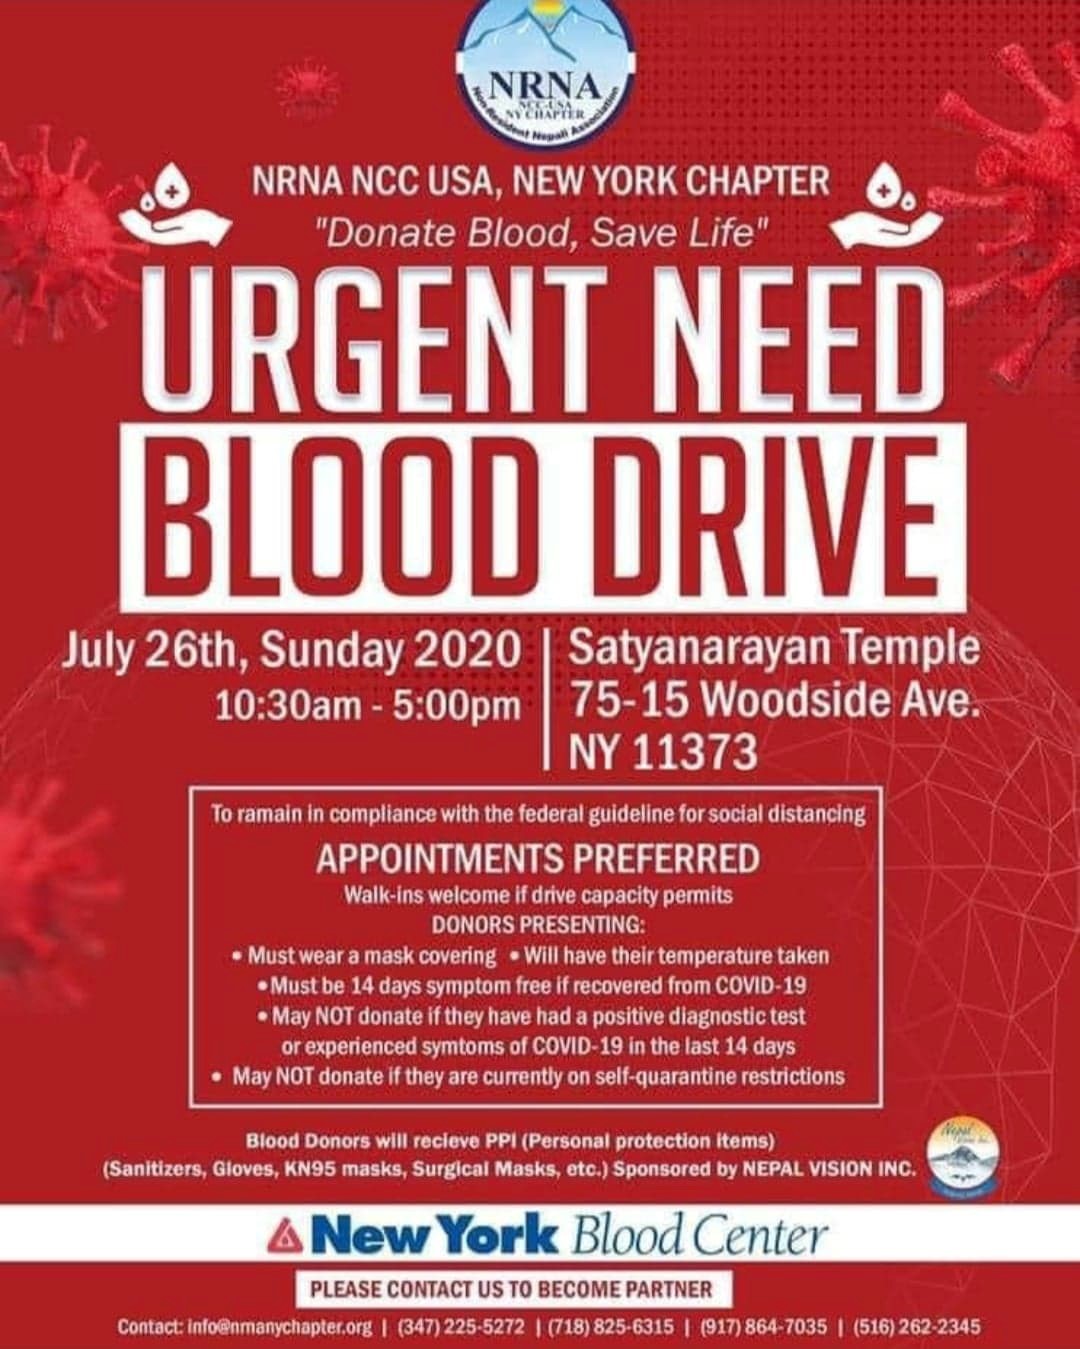 Blood drive event